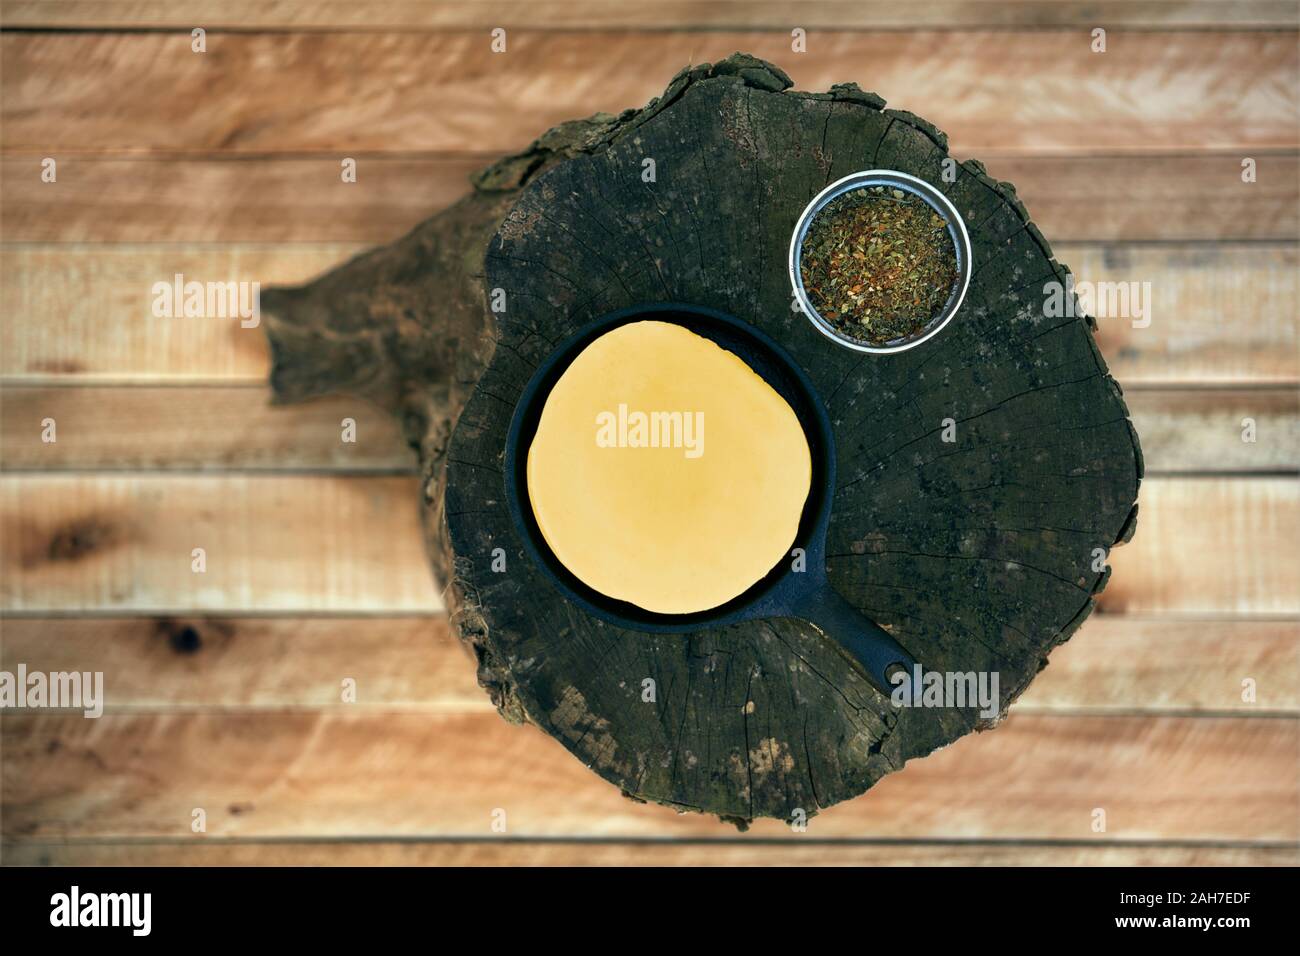 Delicious Argentinian Provolone Yarn Cheese (Provoleta) with spieces over an old log on a wooden surface, province of Buenos Aires, Argentina. Outdoor Stock Photo